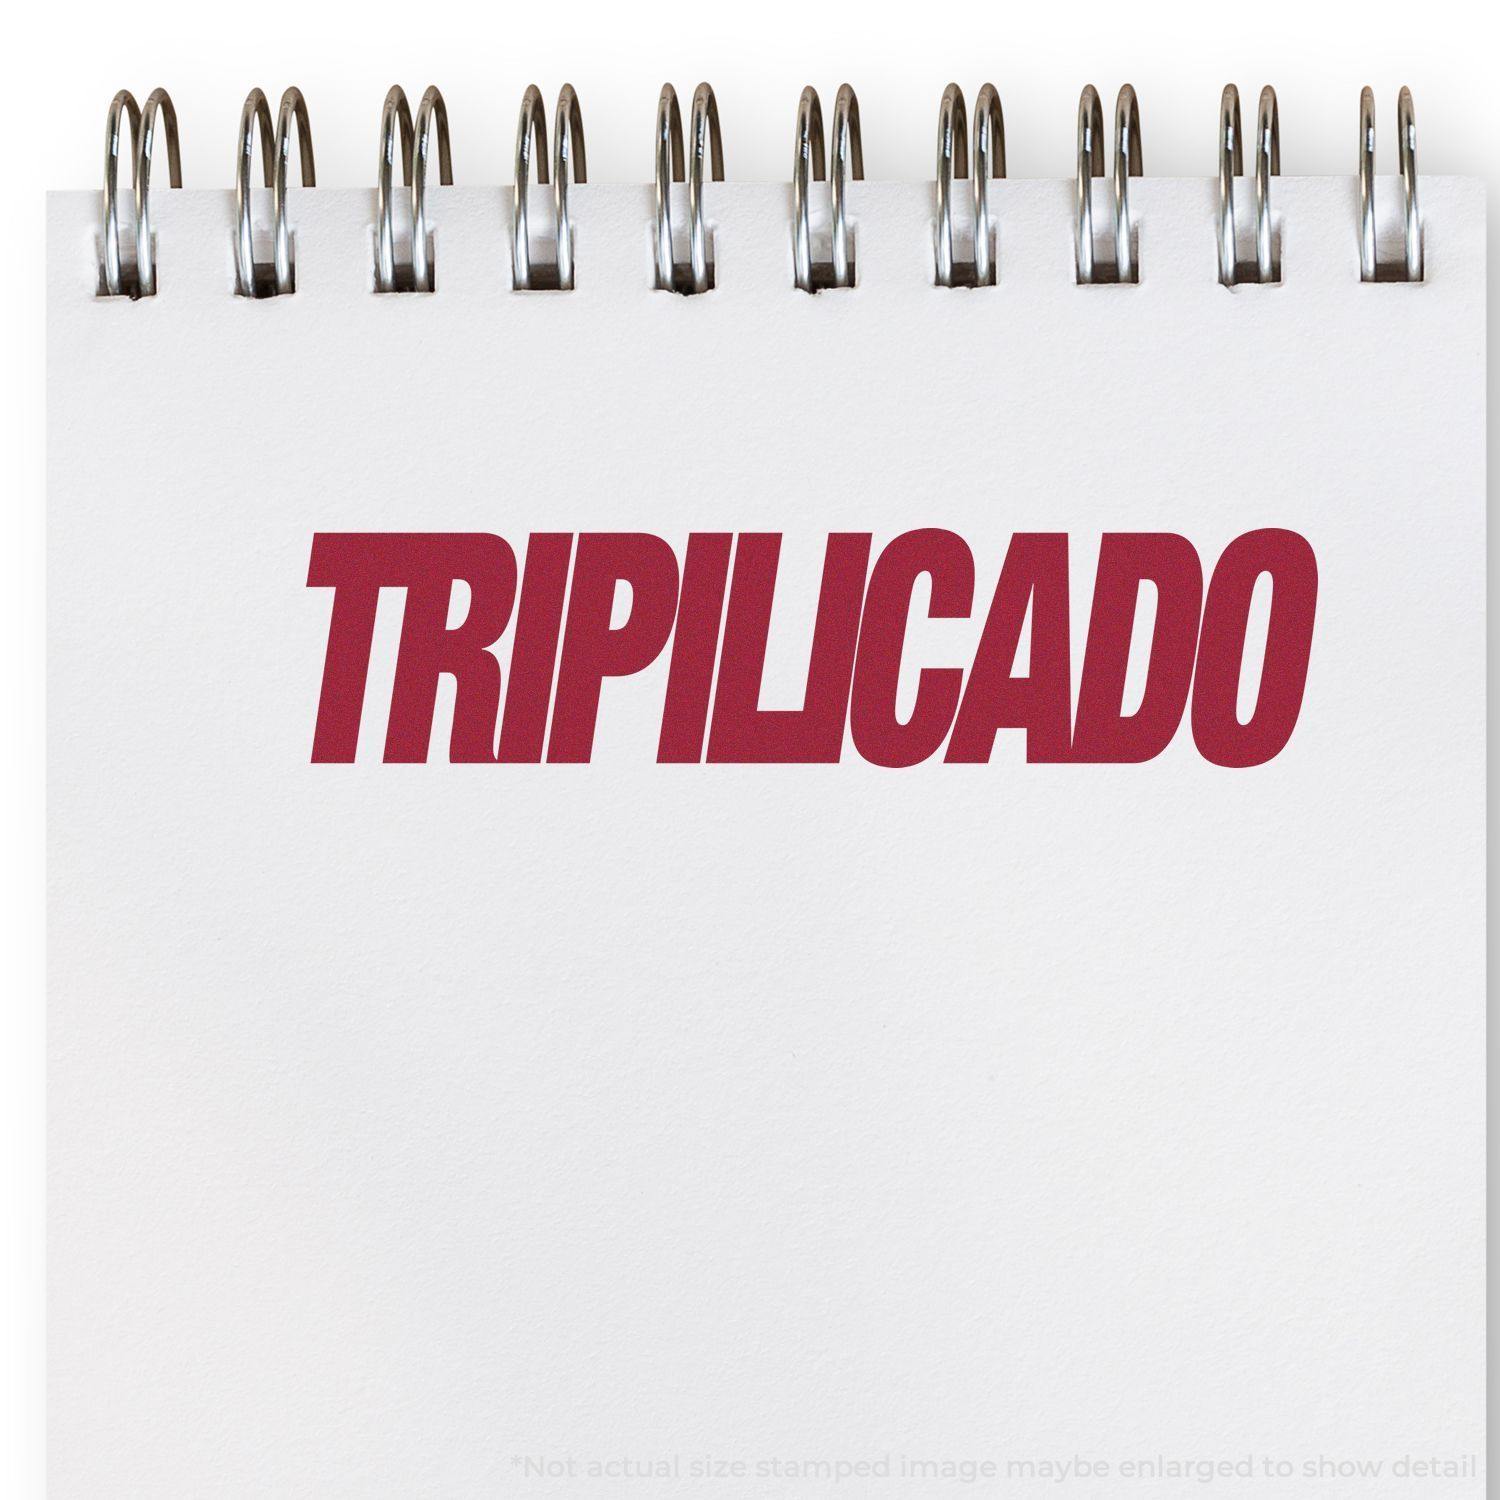 A self-inking stamp with a stamped image showing how the text "TRIPILICADO" is displayed after stamping.